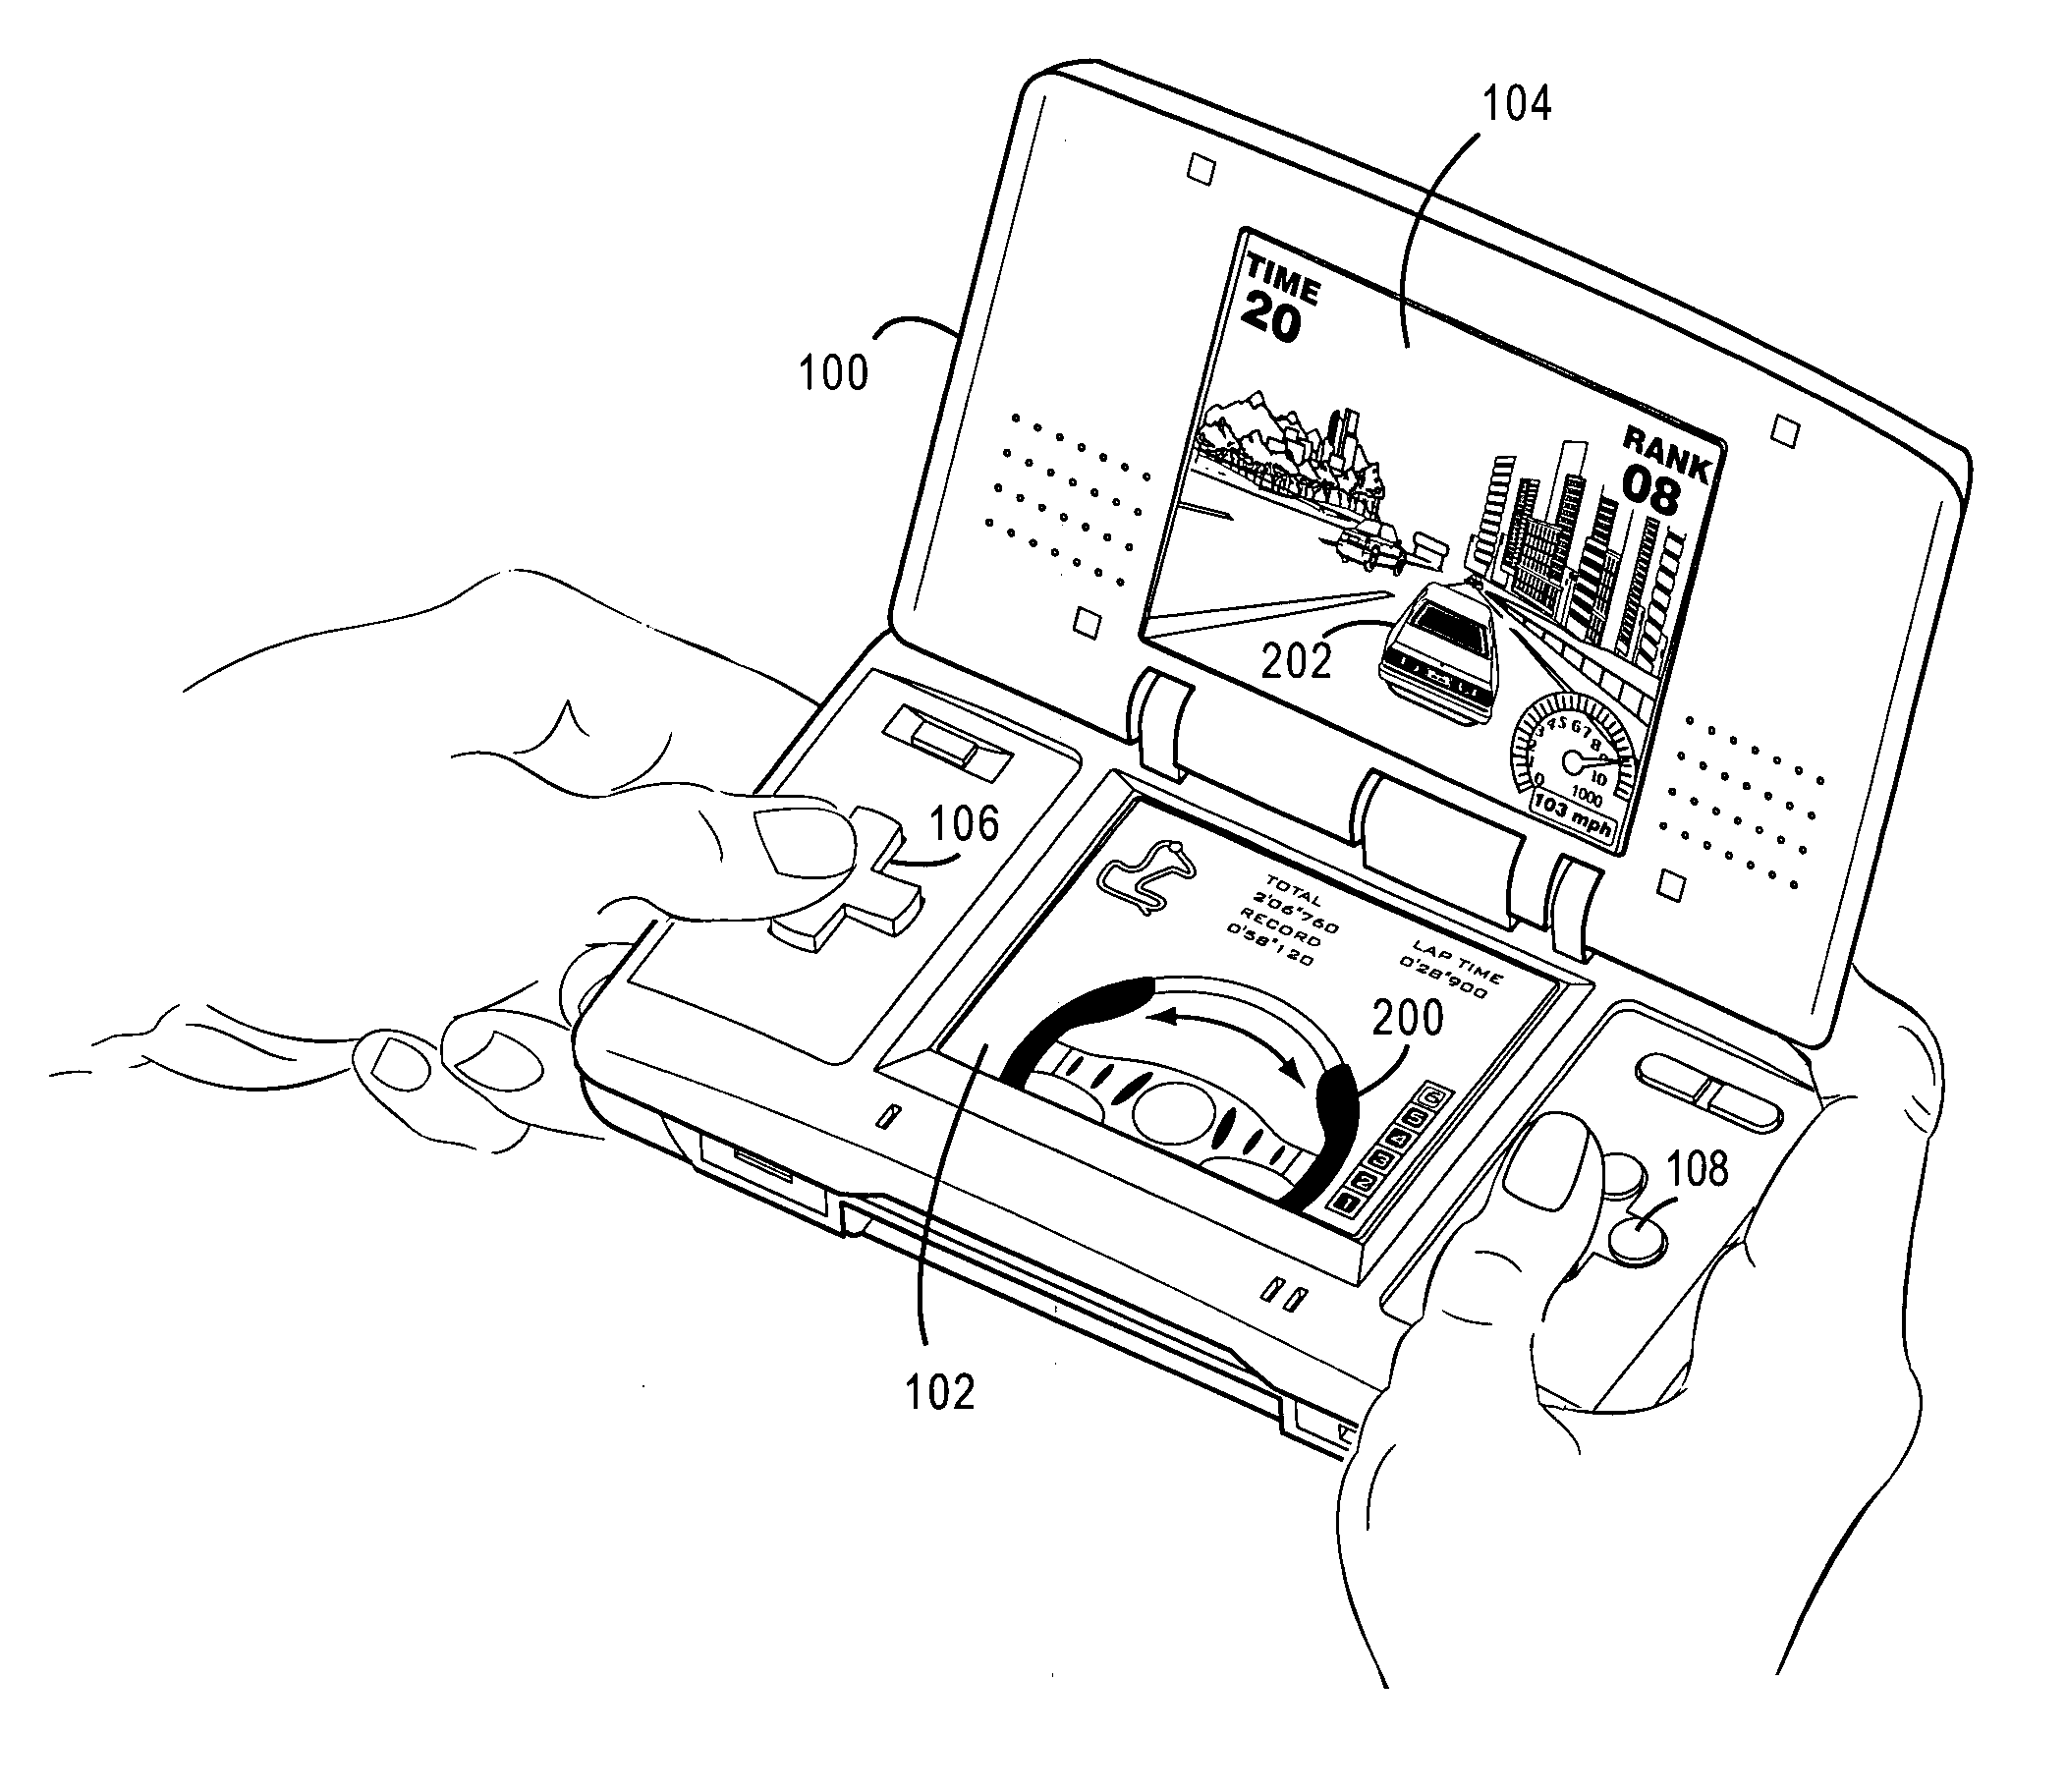 Driving game steering wheel simulation method and apparatus